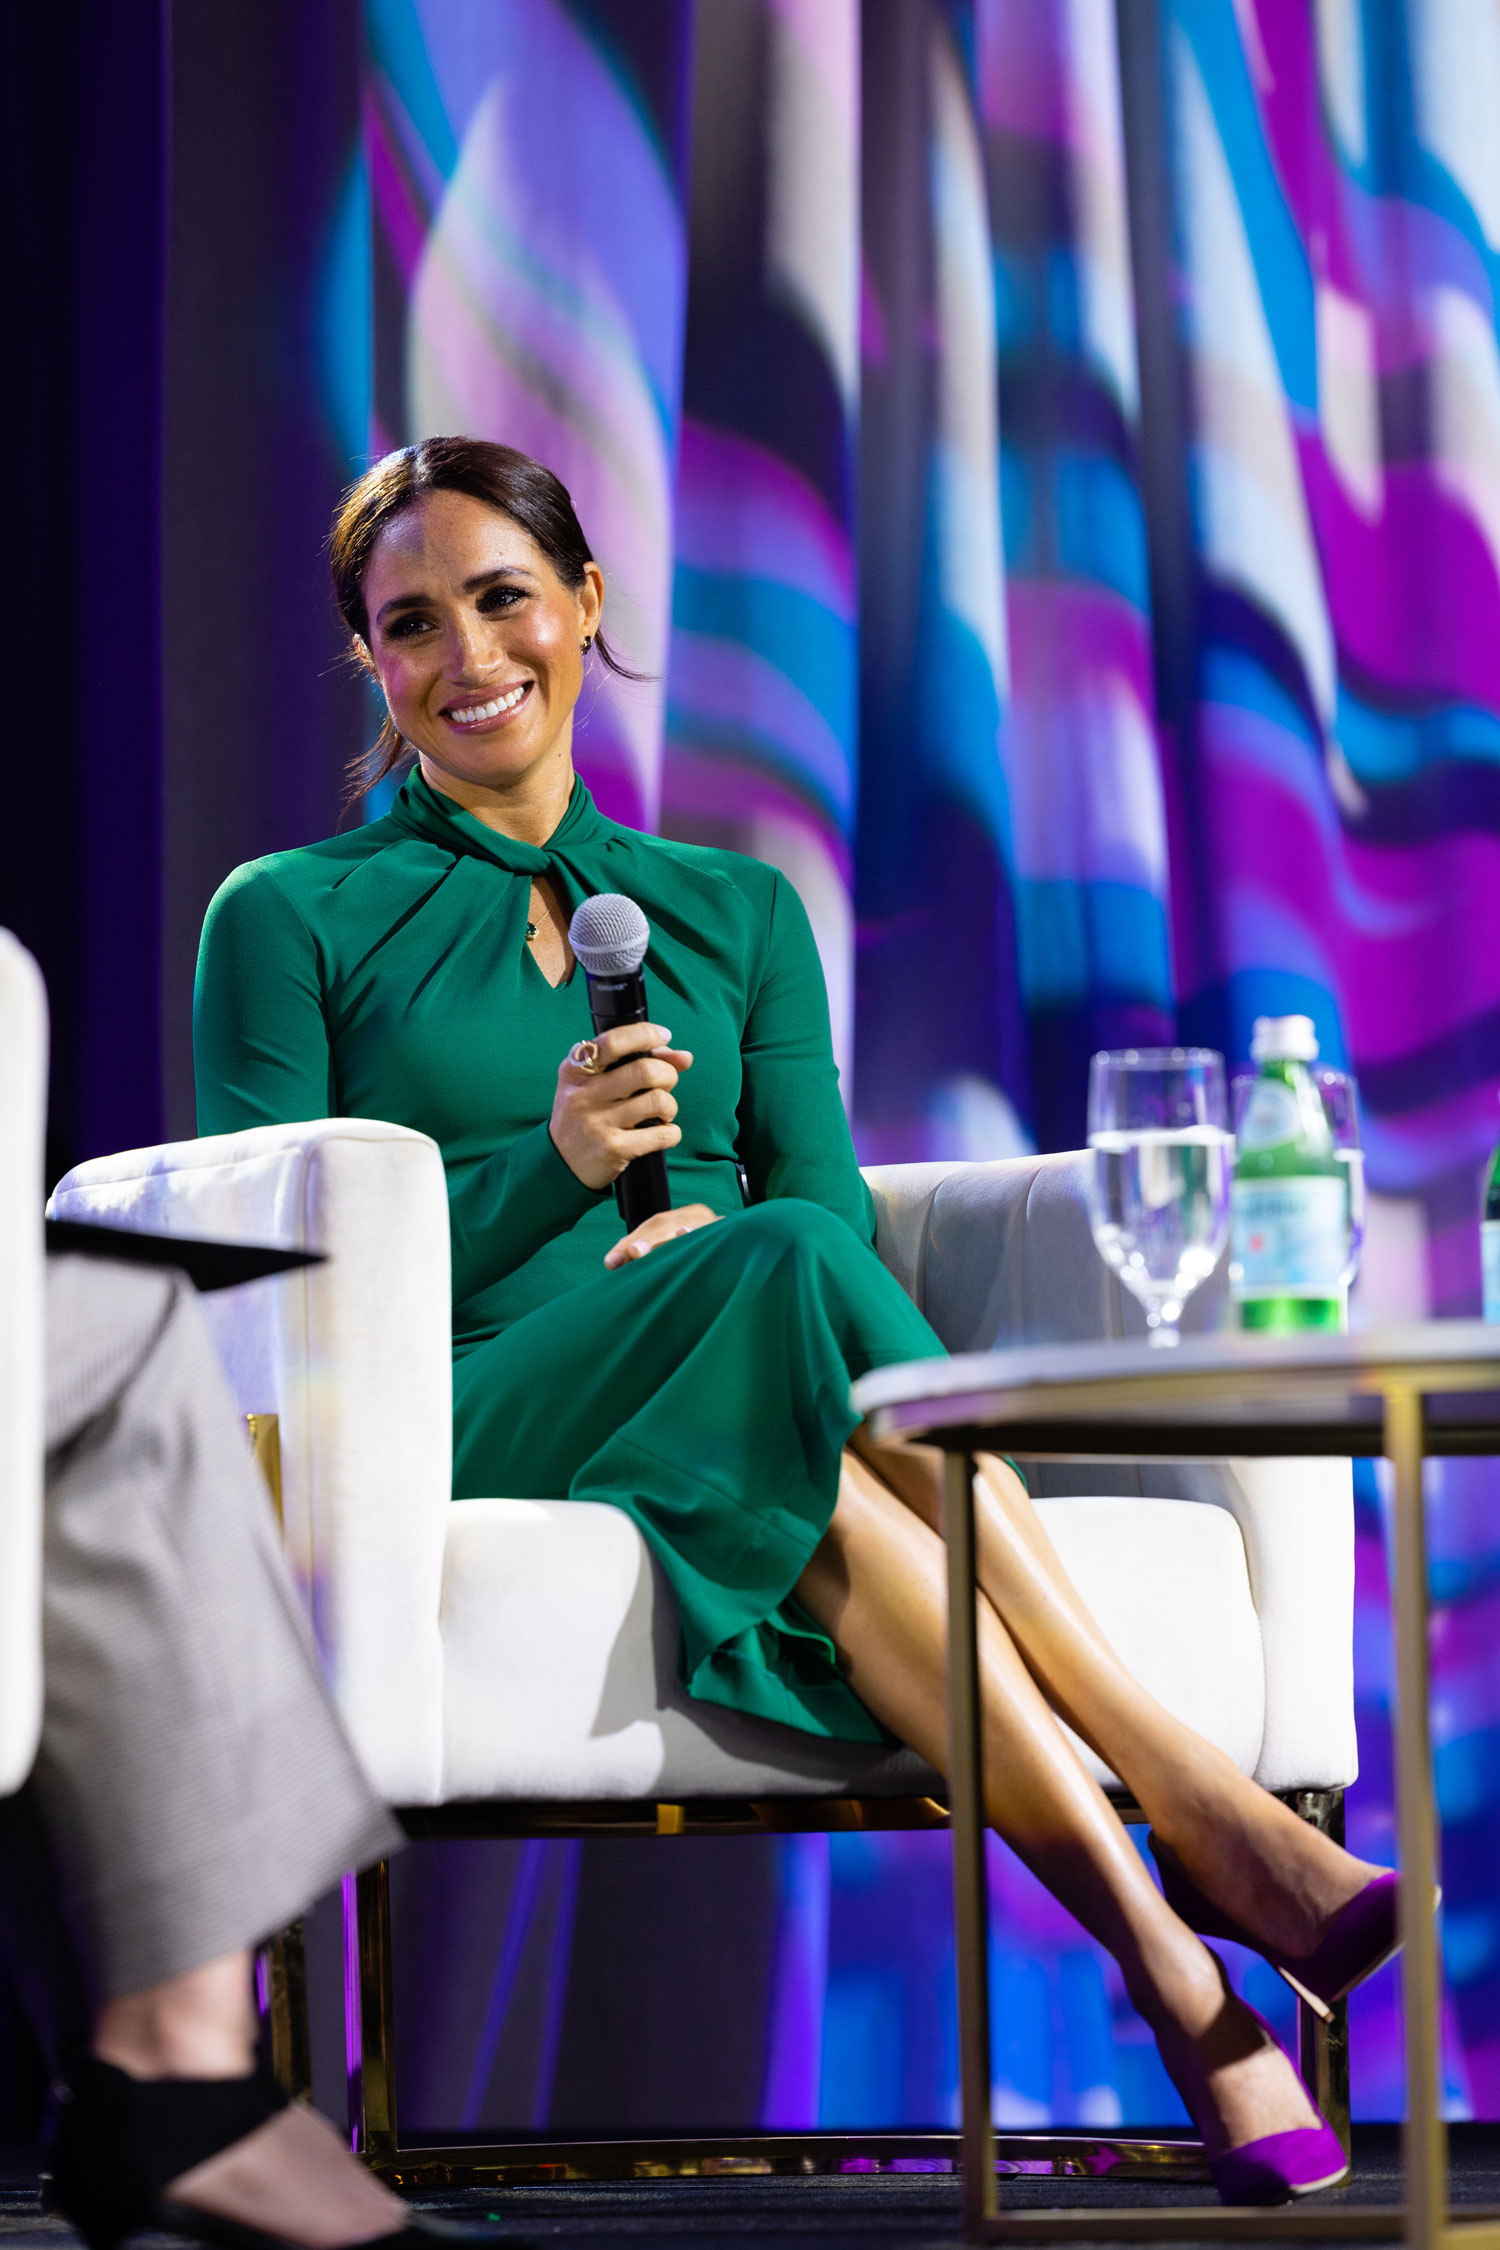 meghan markle wearing a green dress and purple shoes in indiana